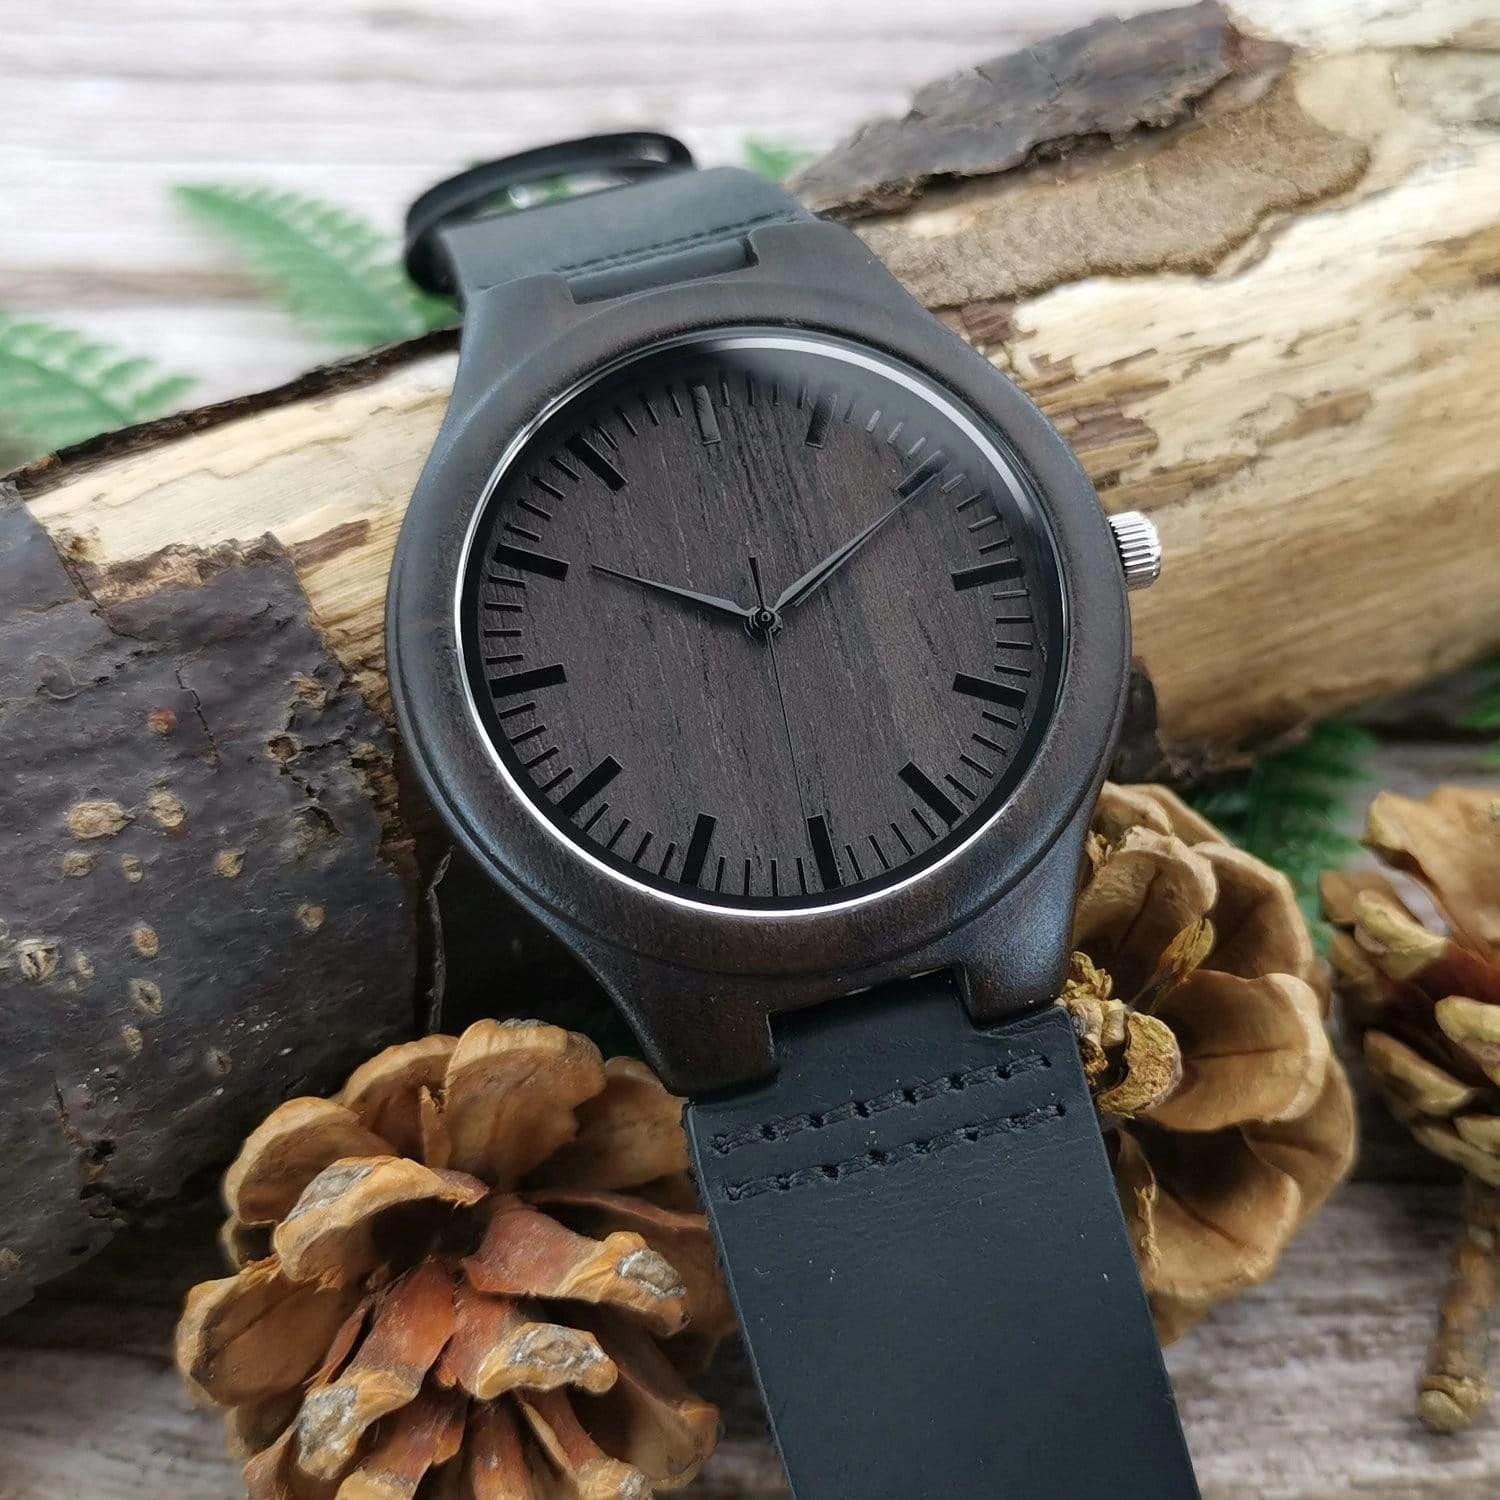 Gift For Son From Mom I Am So Proud Of You Engraved Wooden Watch